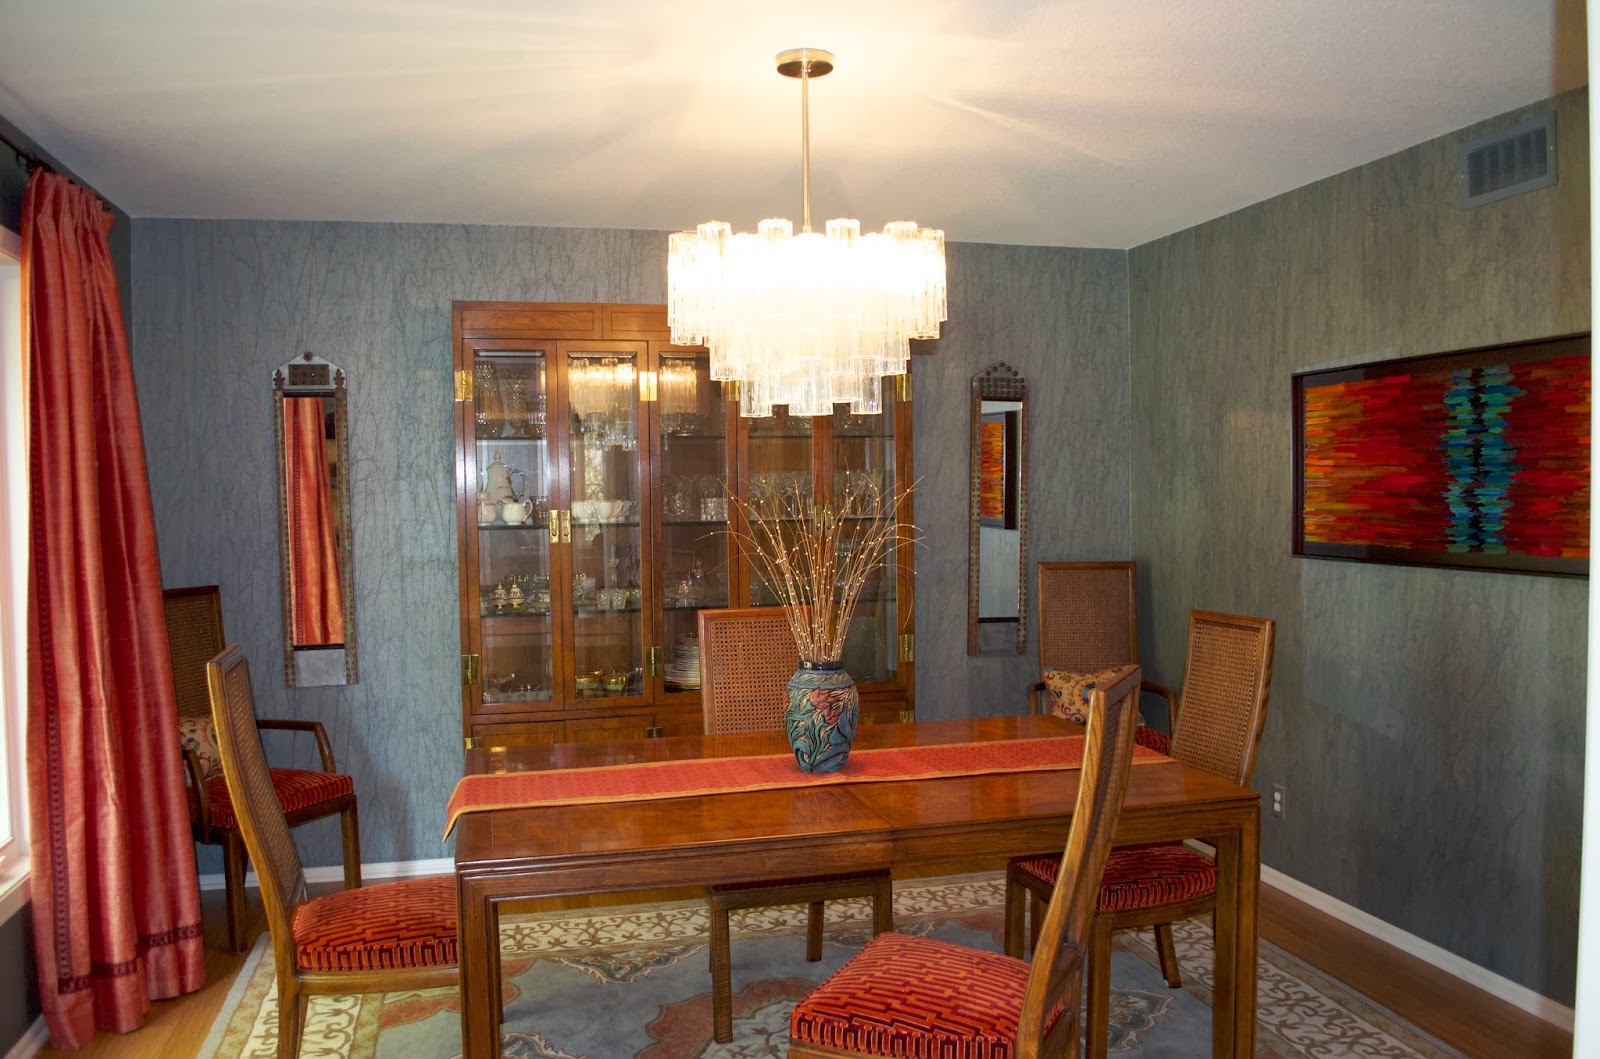 Color Me Lovely Eclectic Vintage Color Part 2 The Dining Room